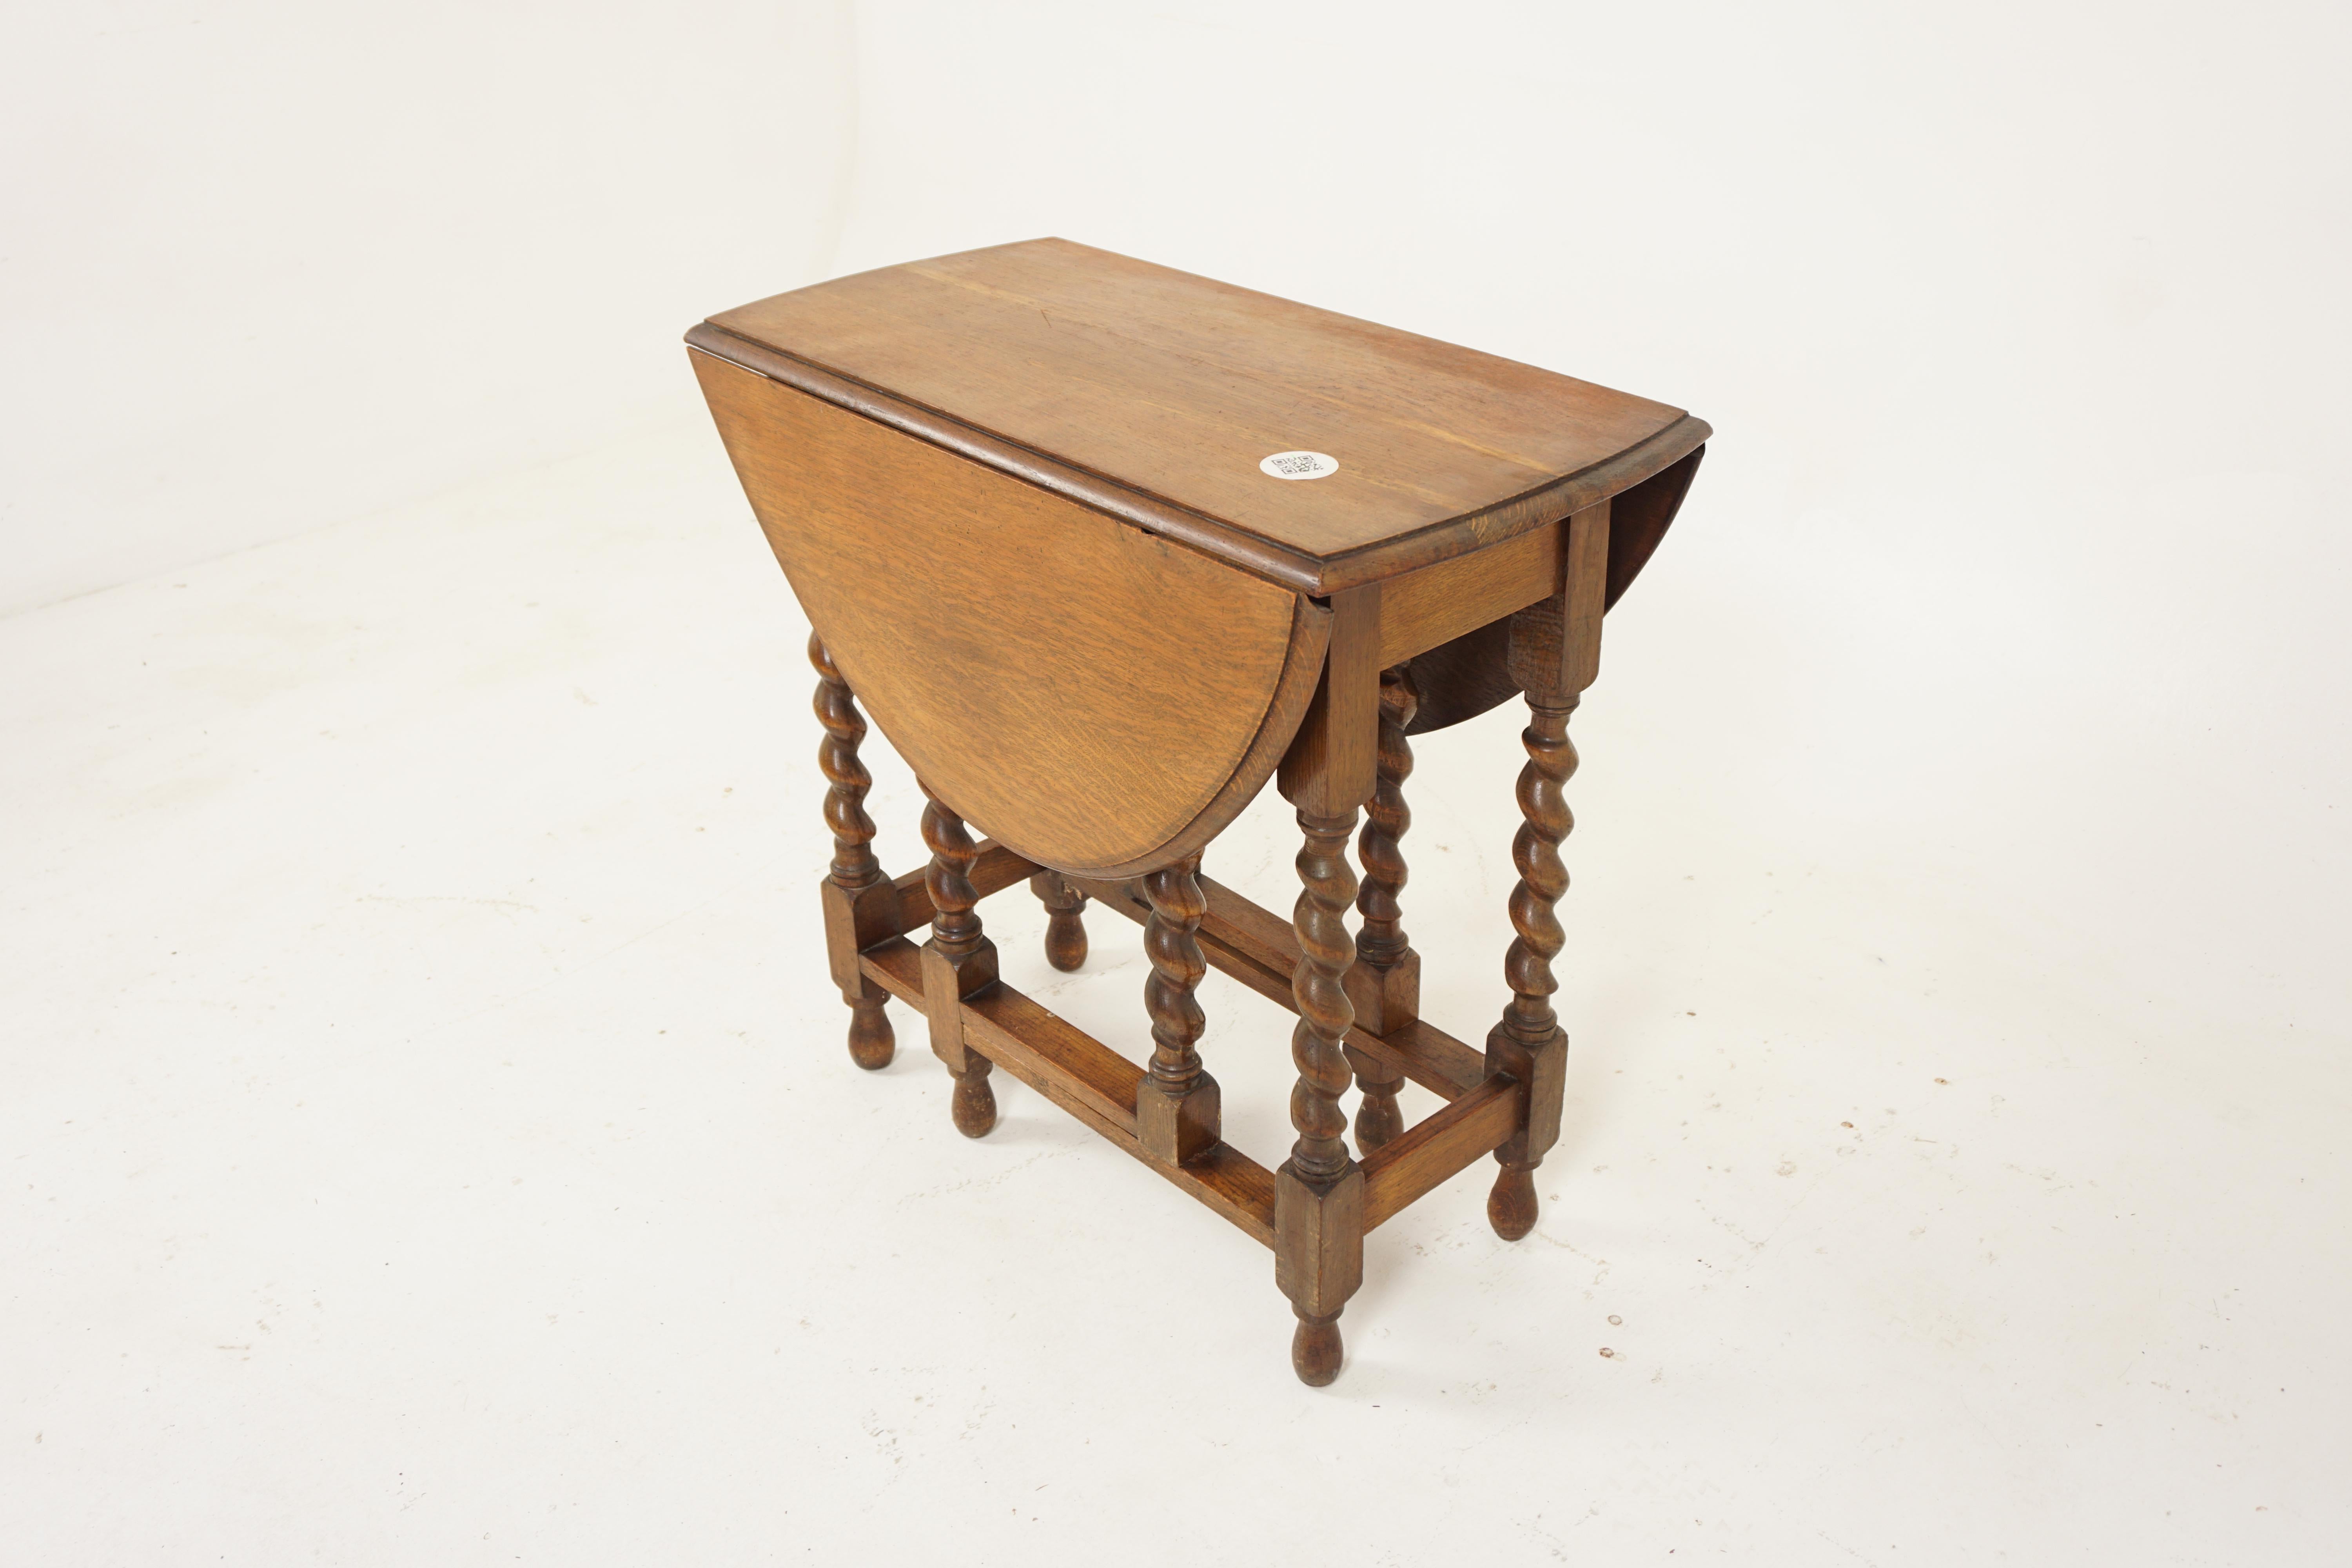 Ant. barley twist oak gateleg, table, drop leaf table, Scotland 1910, H860

Scotland 1910
Solid oak
Original finish
Having a quality top with two oval leaves
Supported by eight barley twist legs
United by moulded oak stretchers
Raised on